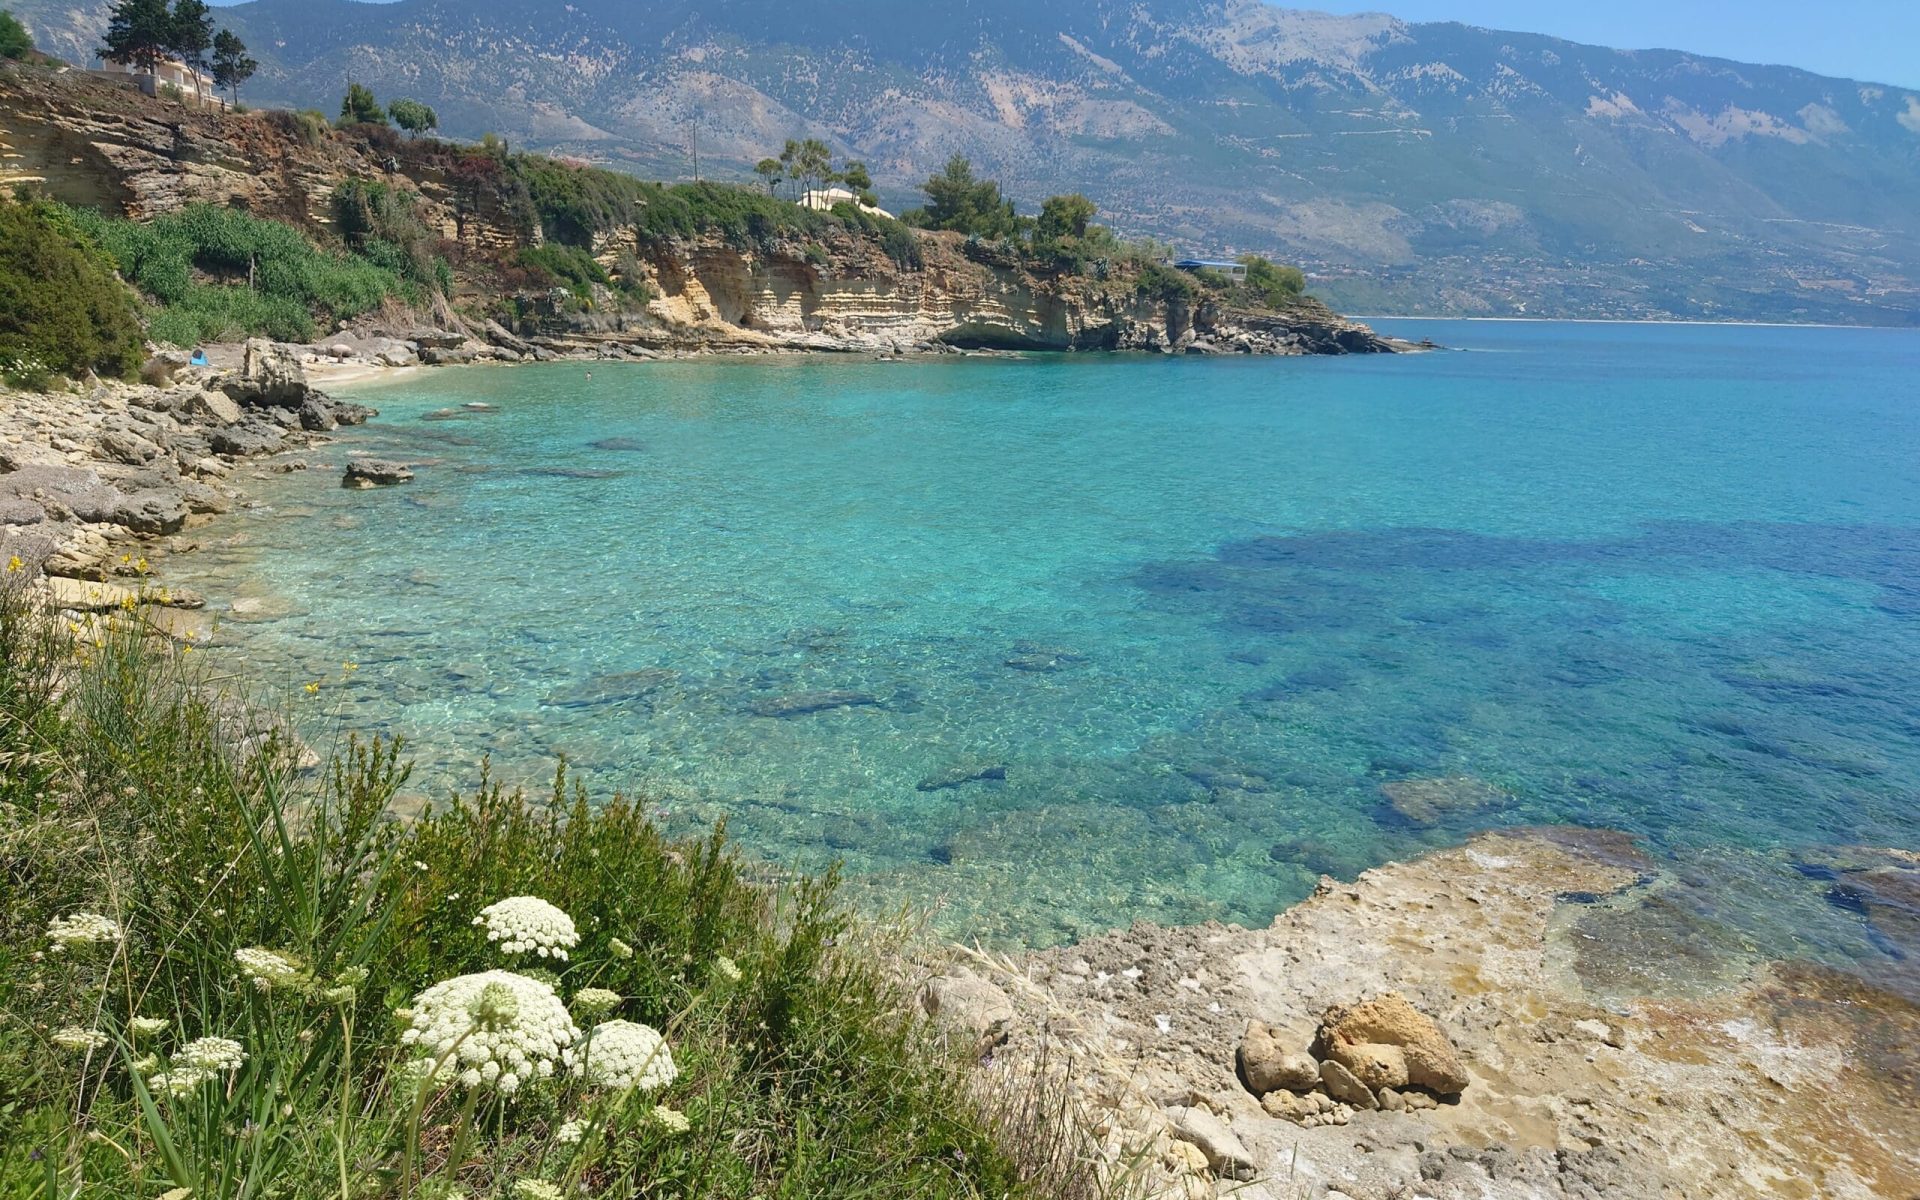 Scenic coastline of Kefalonia, Greece with clear blue waters